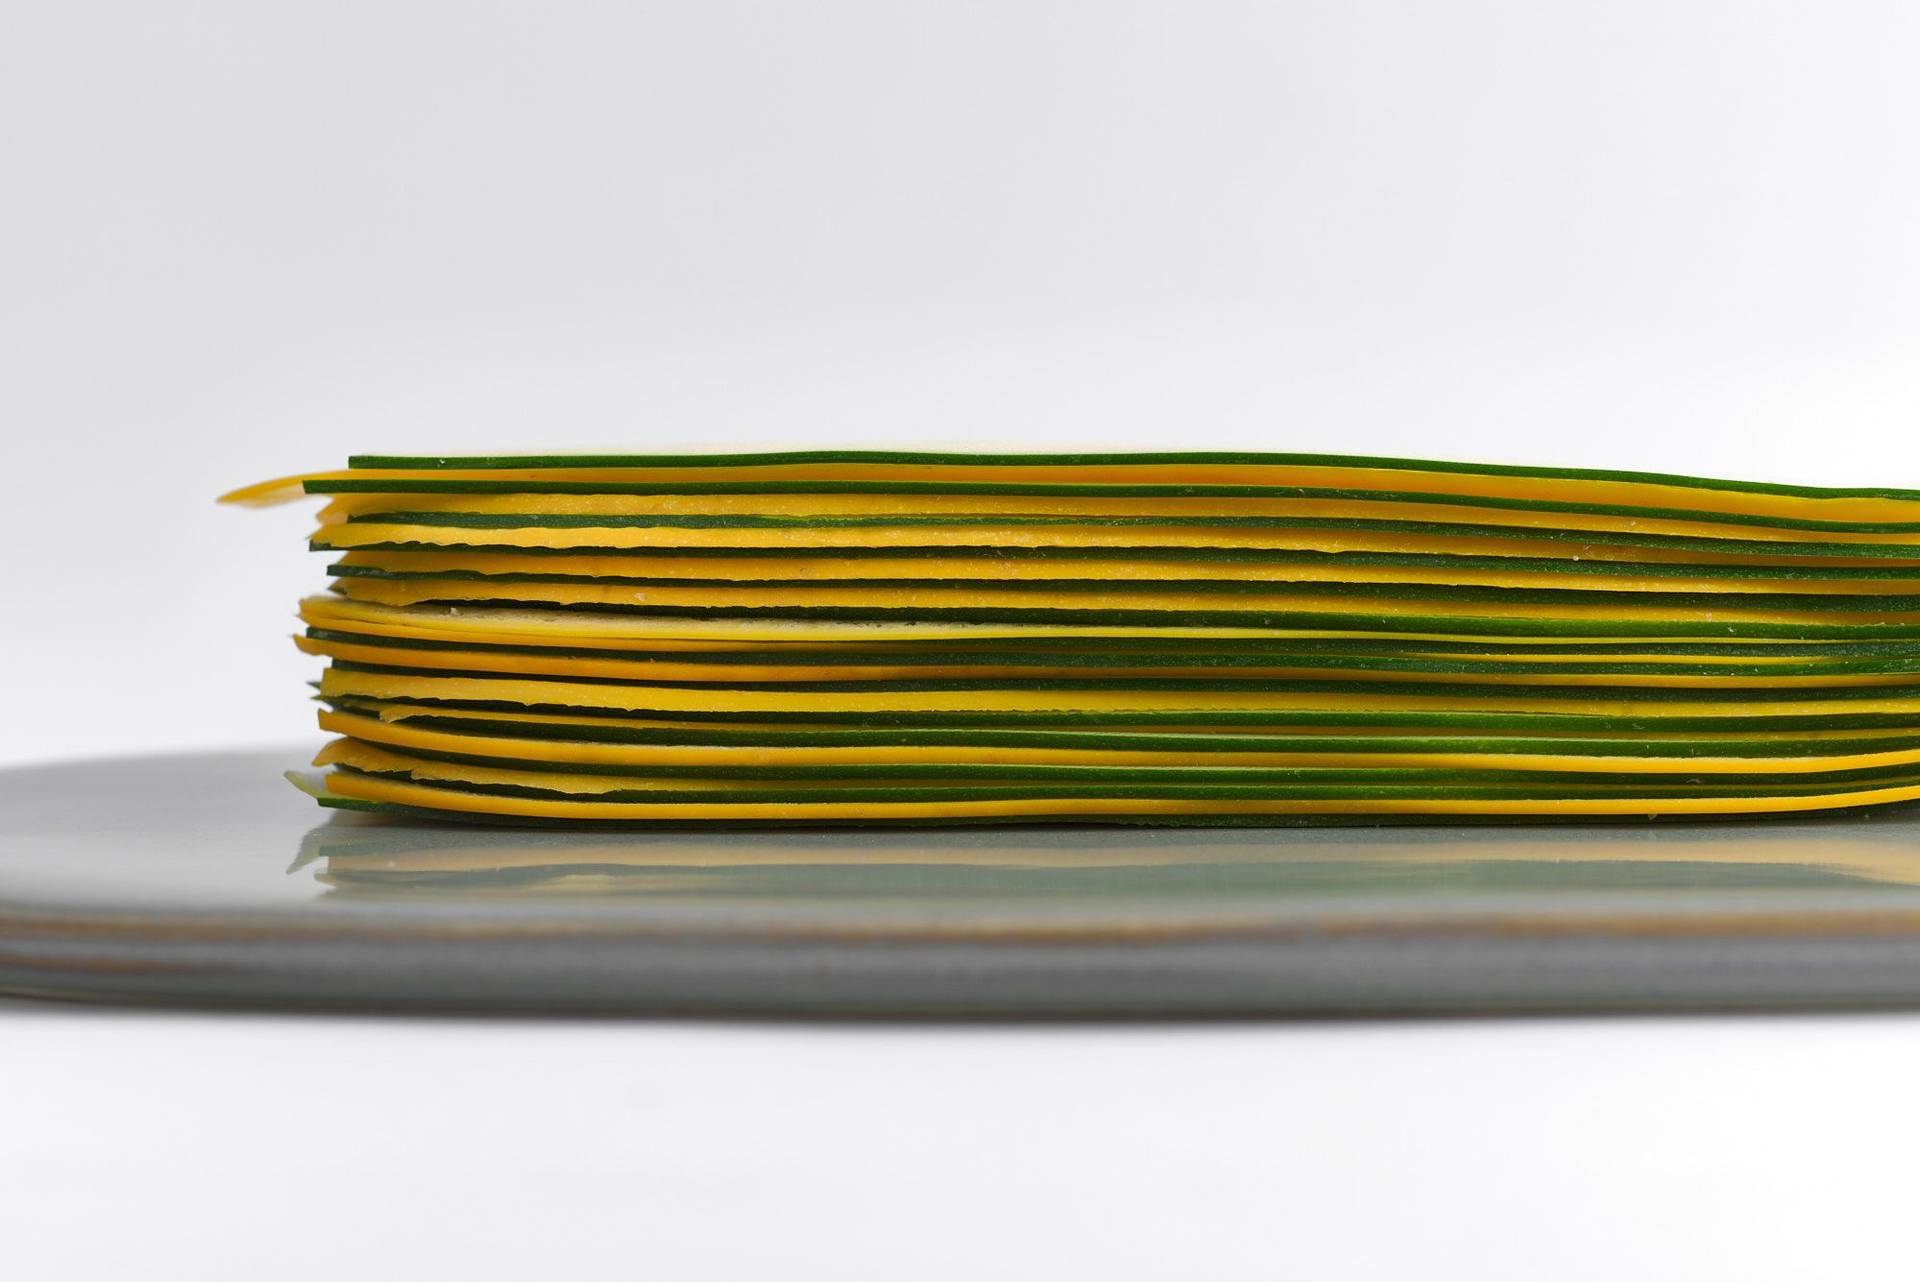 sliced courgette mille feuille on a gray plate with white background